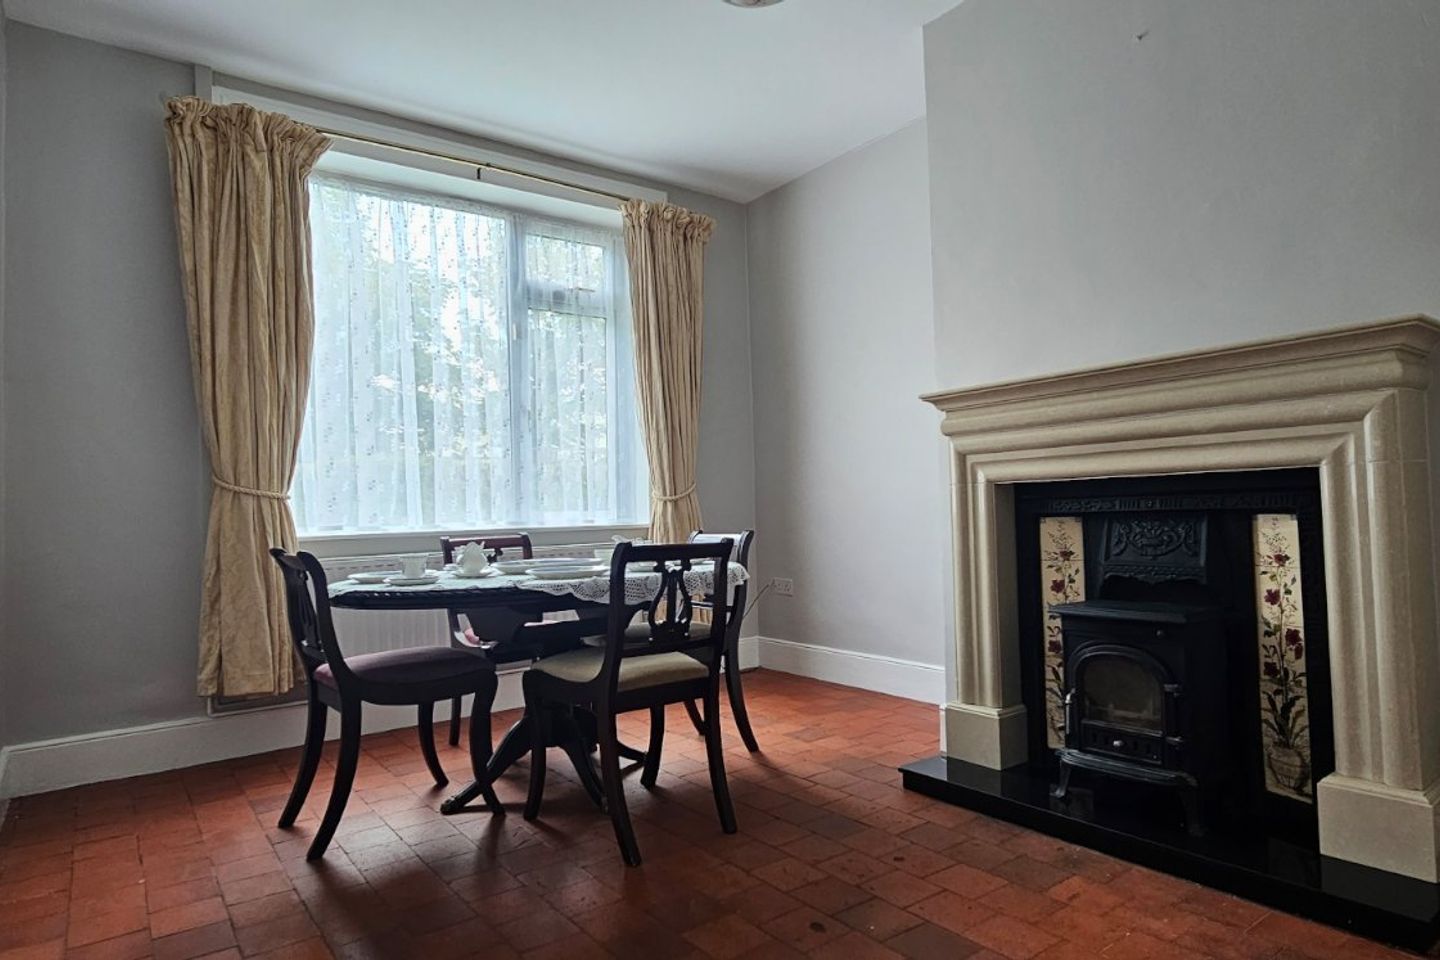 Conniberry House, Old Knockmay Road, Portlaoise, Co. Laois, R32WEY7